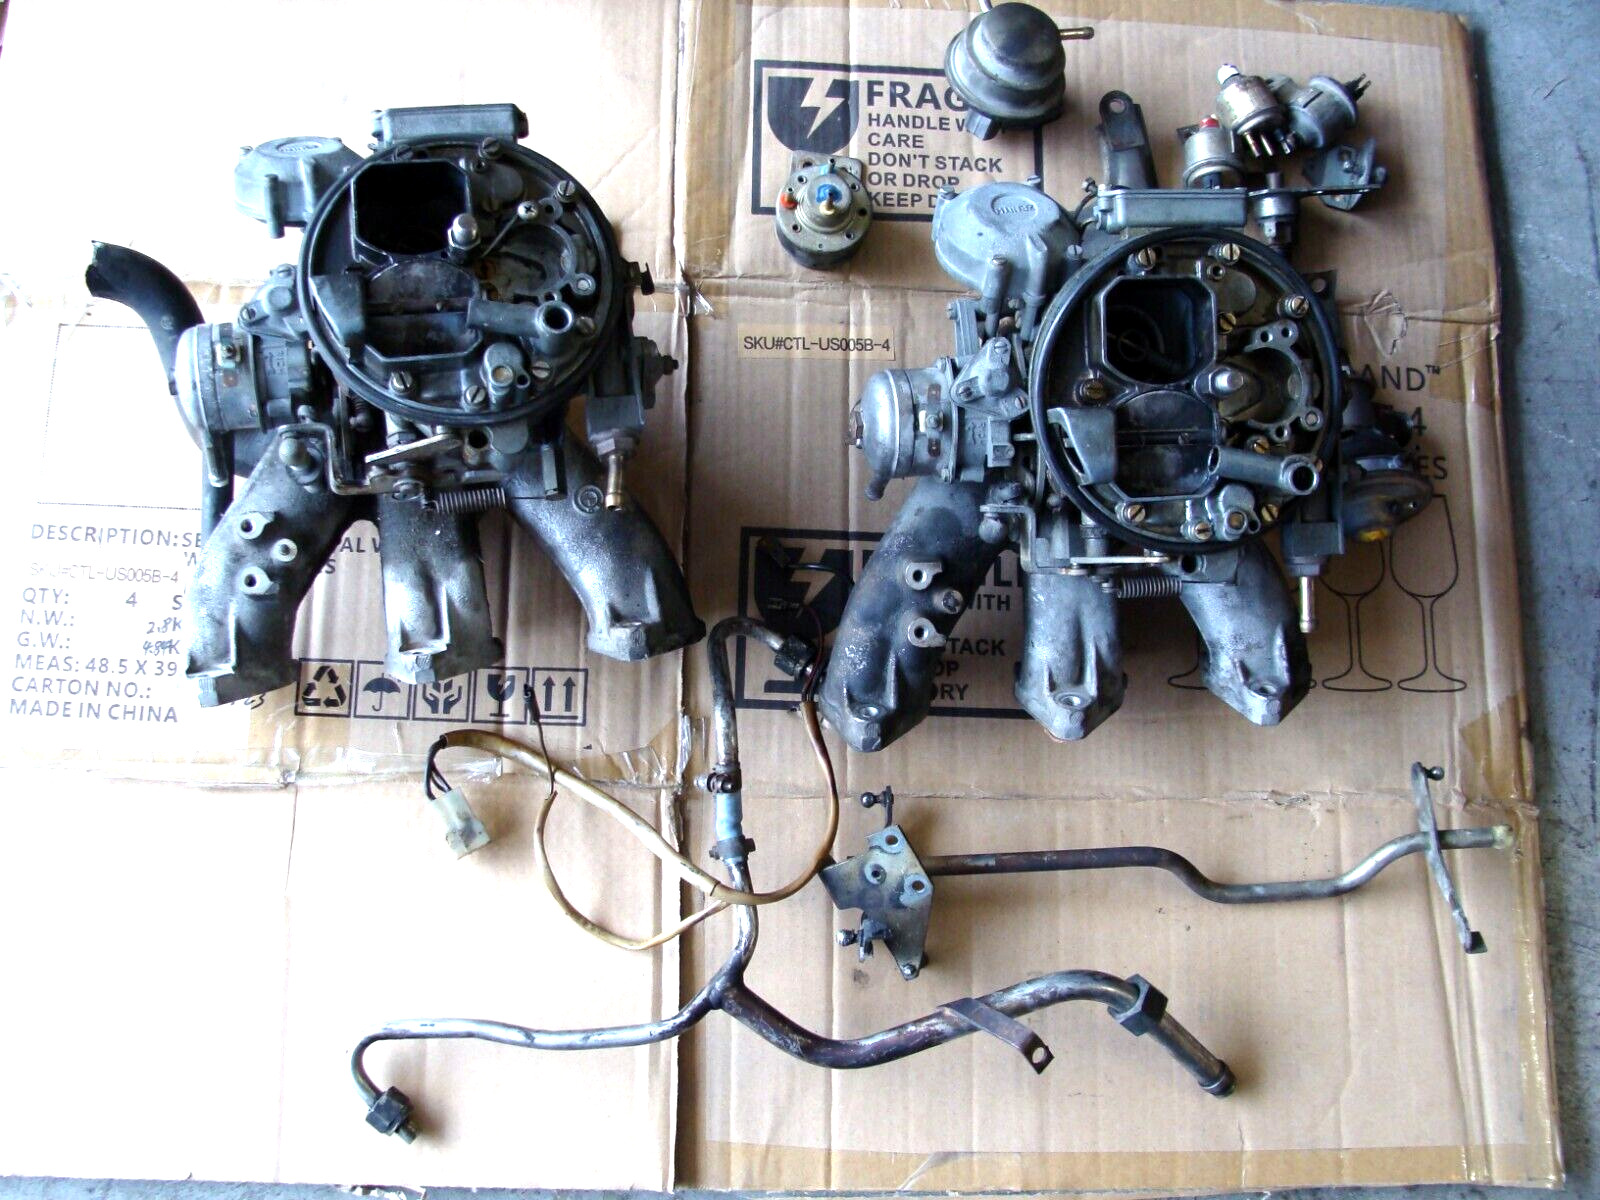 BMW E3 E9 Dual Zenith Carburetors with intake manifolds KNOWN WORKING. 1971-1974